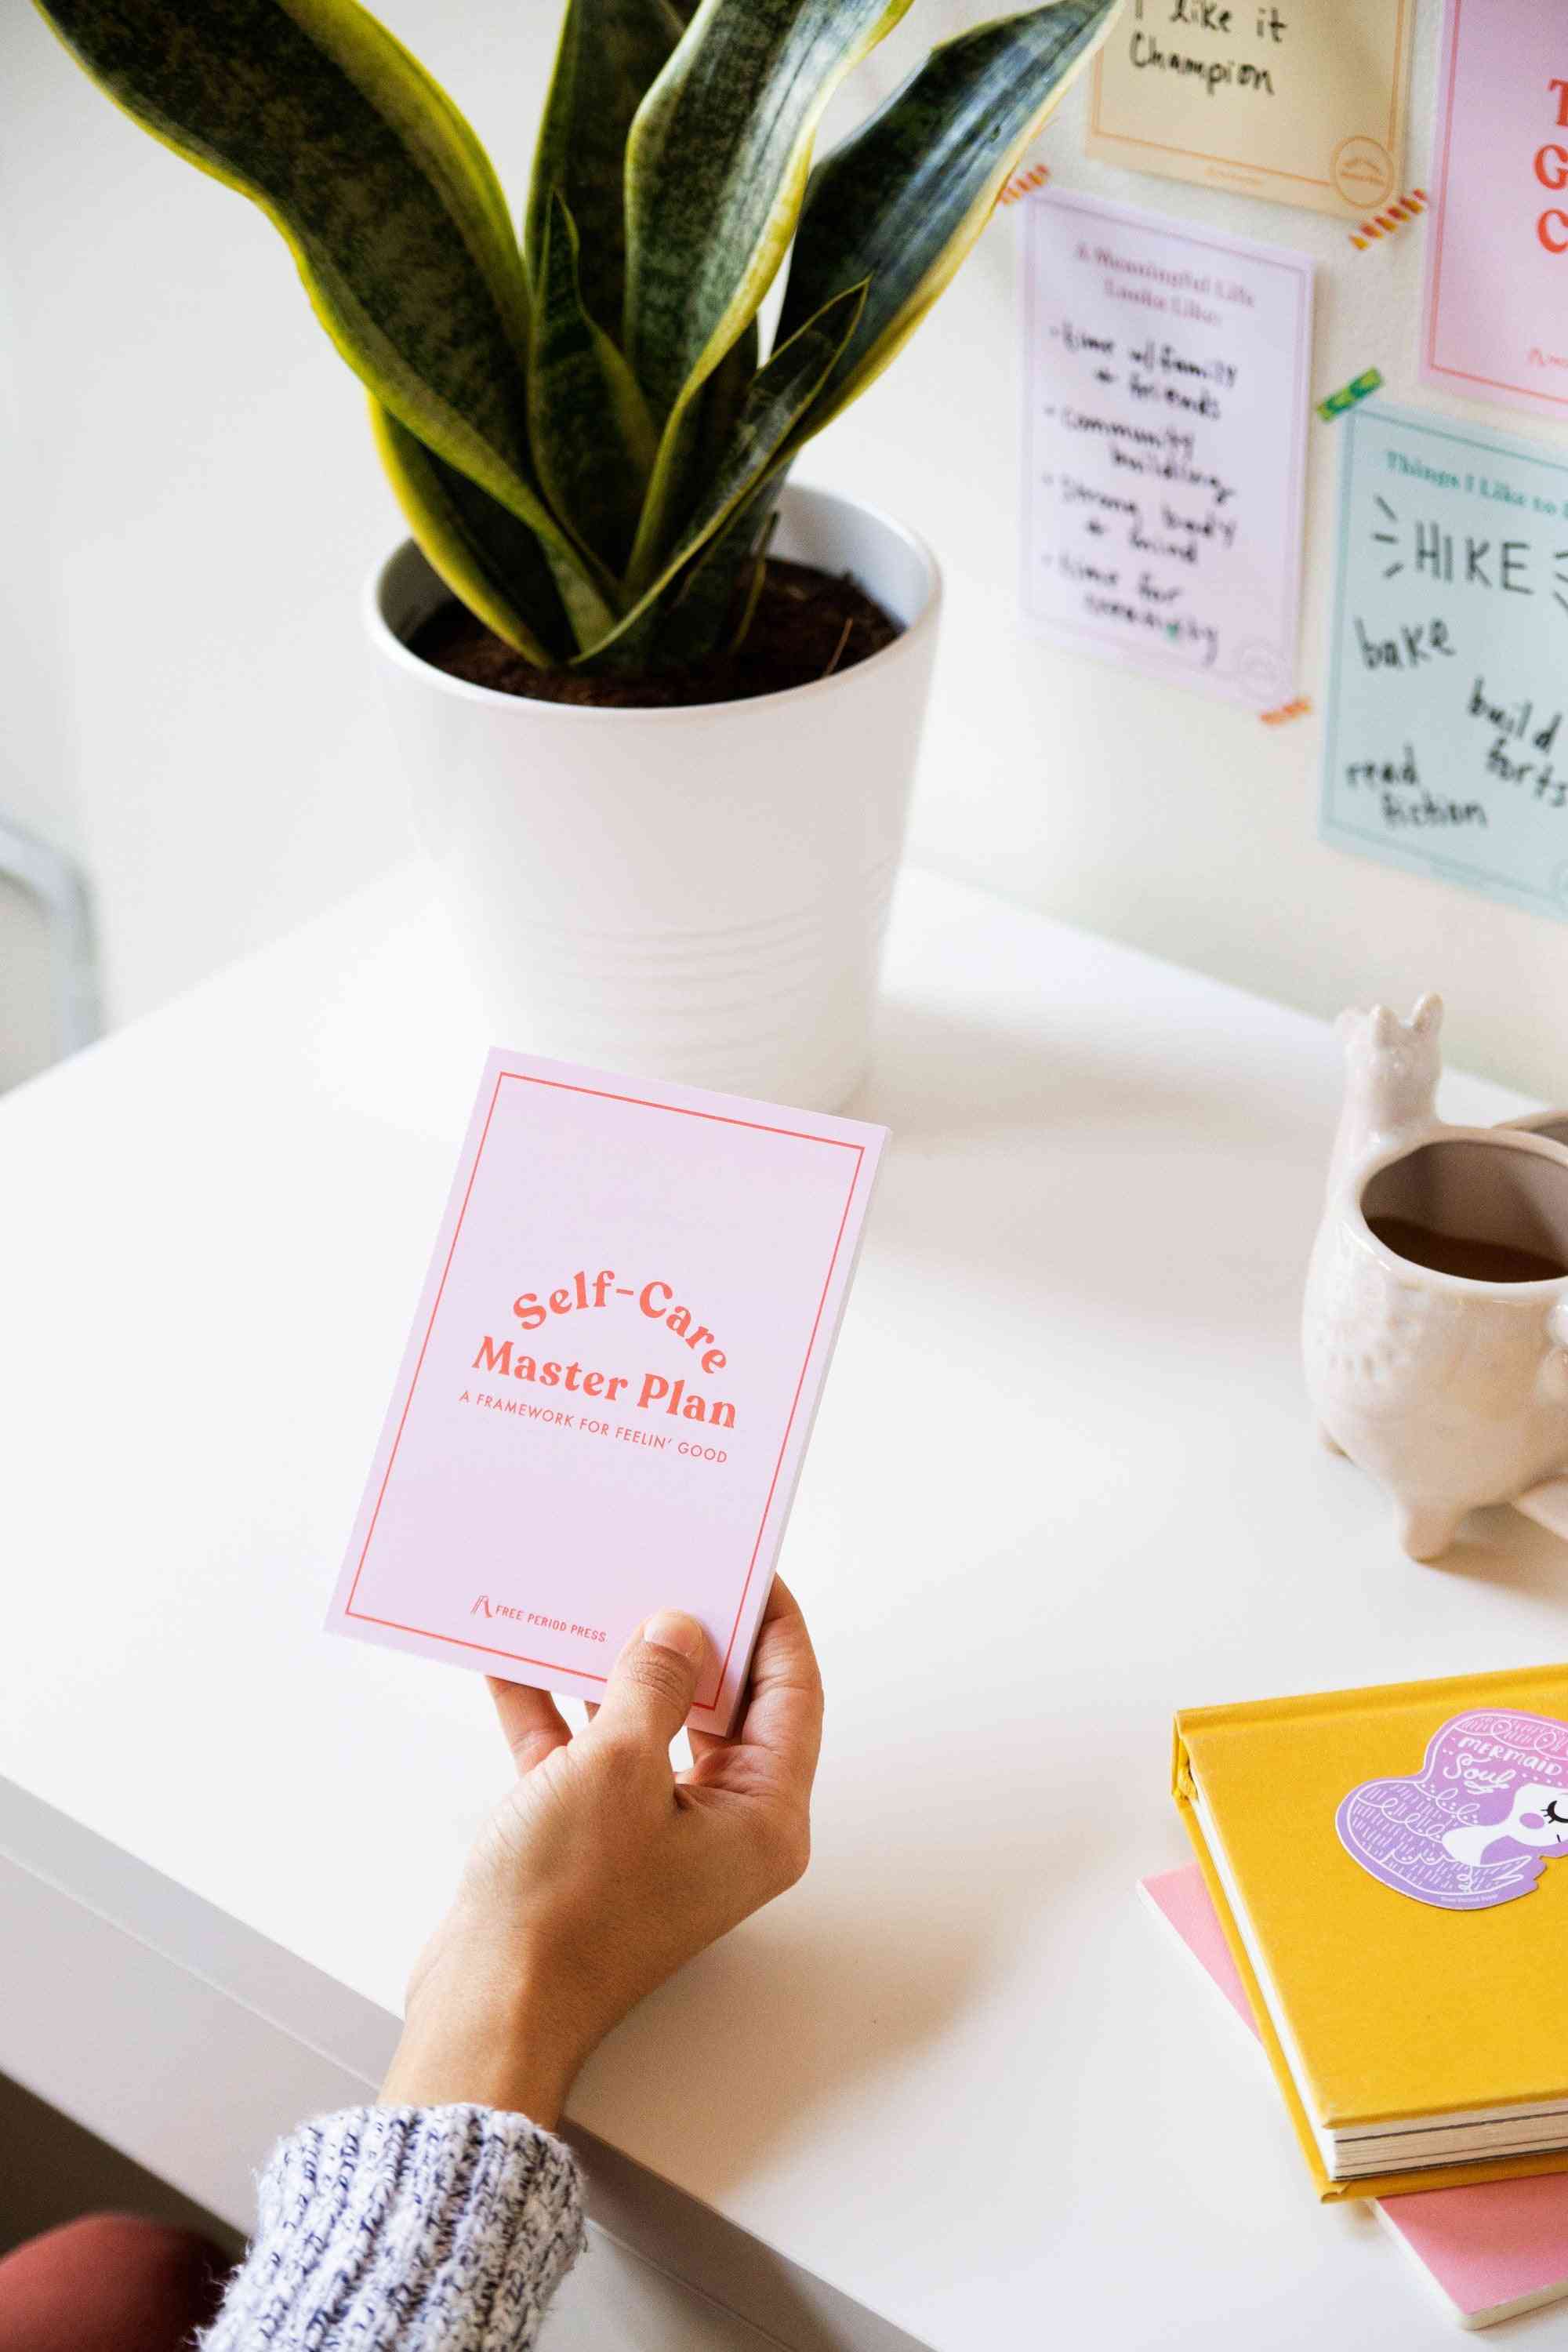 Self-care Master Plan: A Guided Journal For Feeling Good